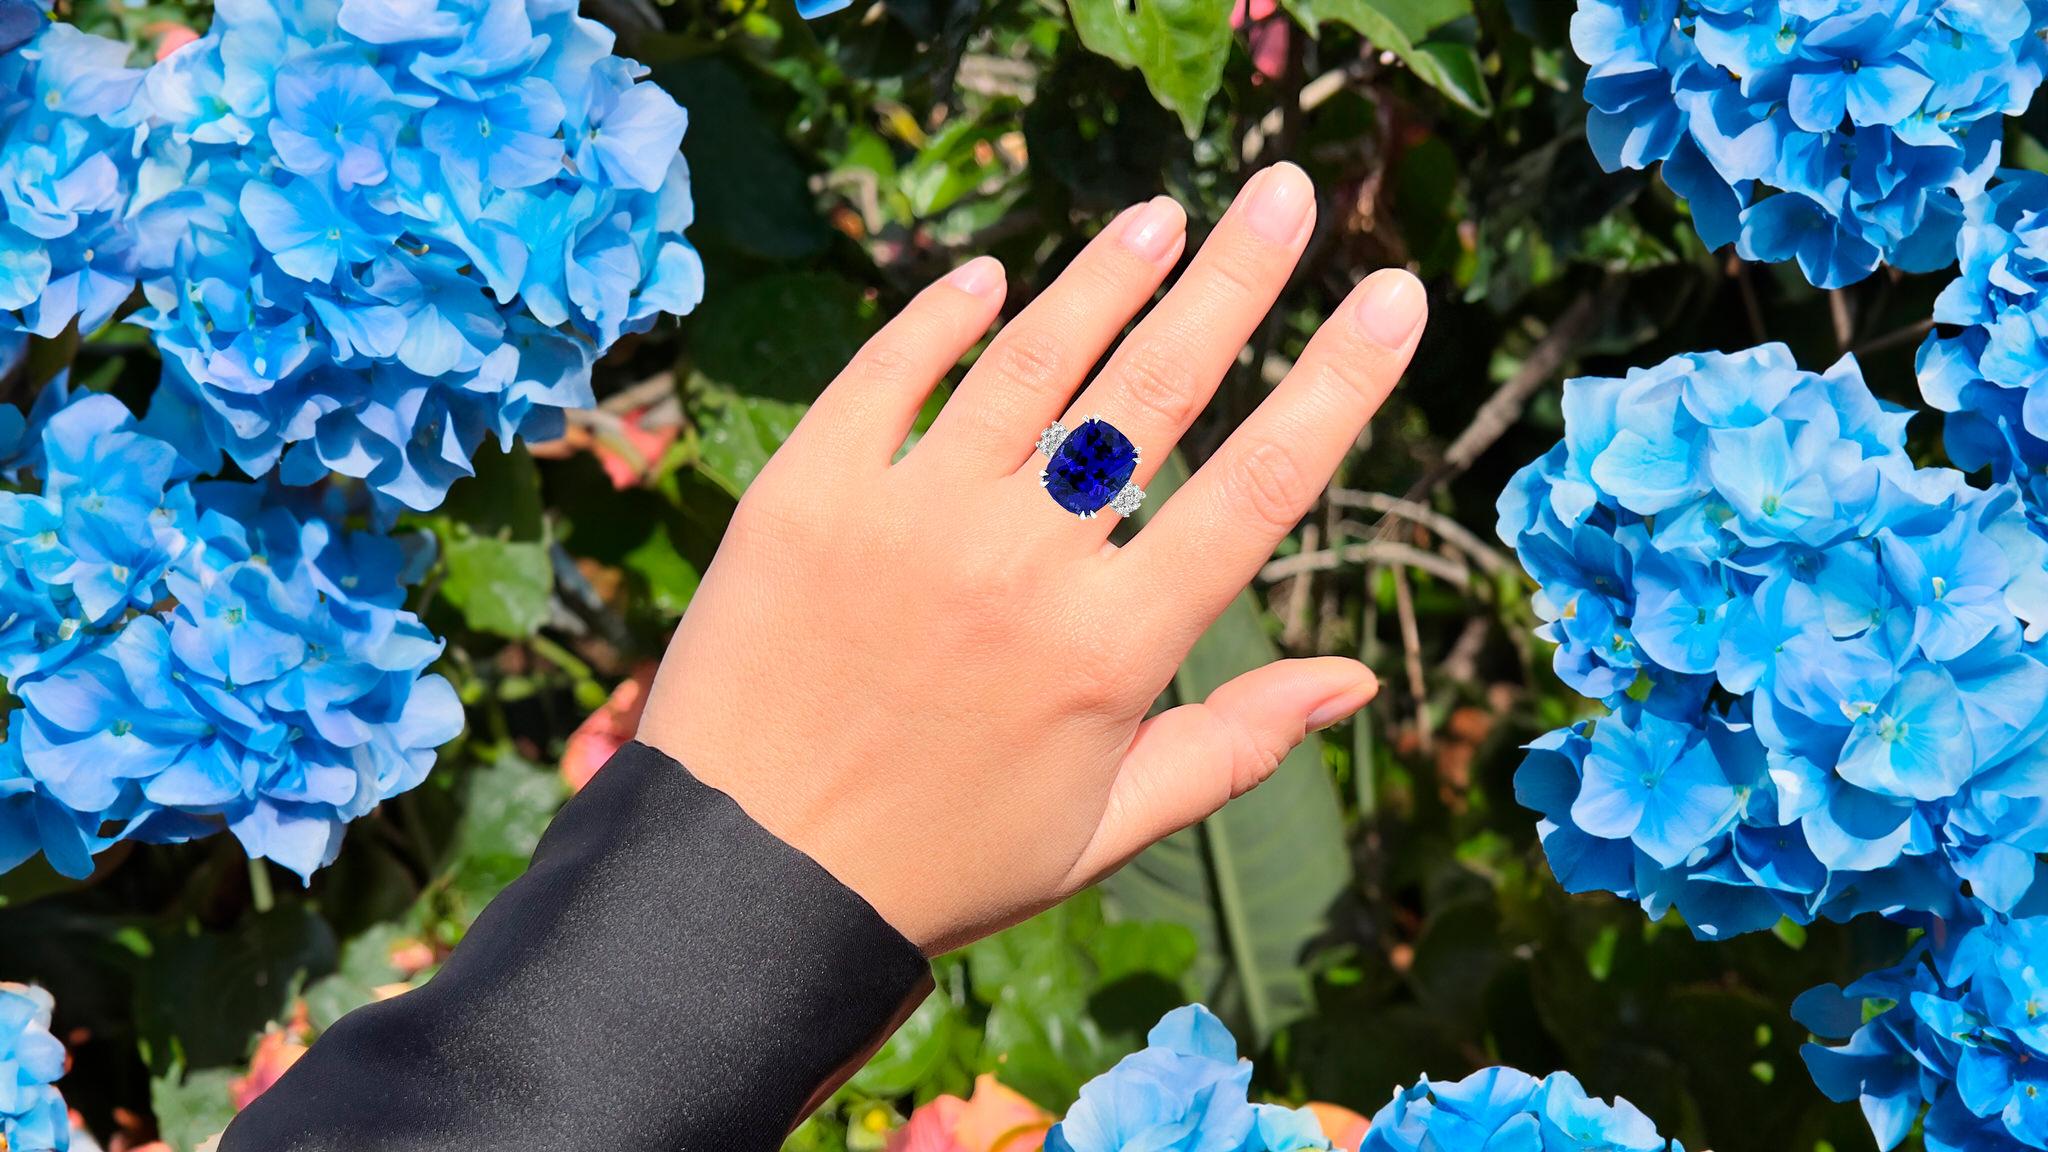 It comes with the Gemological Appraisal by GIA GG/AJP
All Gemstones are Natural
Tanzanite = 19.68 Carat
44 Diamonds = 1.14 Carats
Metal: 18K White Gold
Ring Size: 6.5* US
*It can be resized complimentary